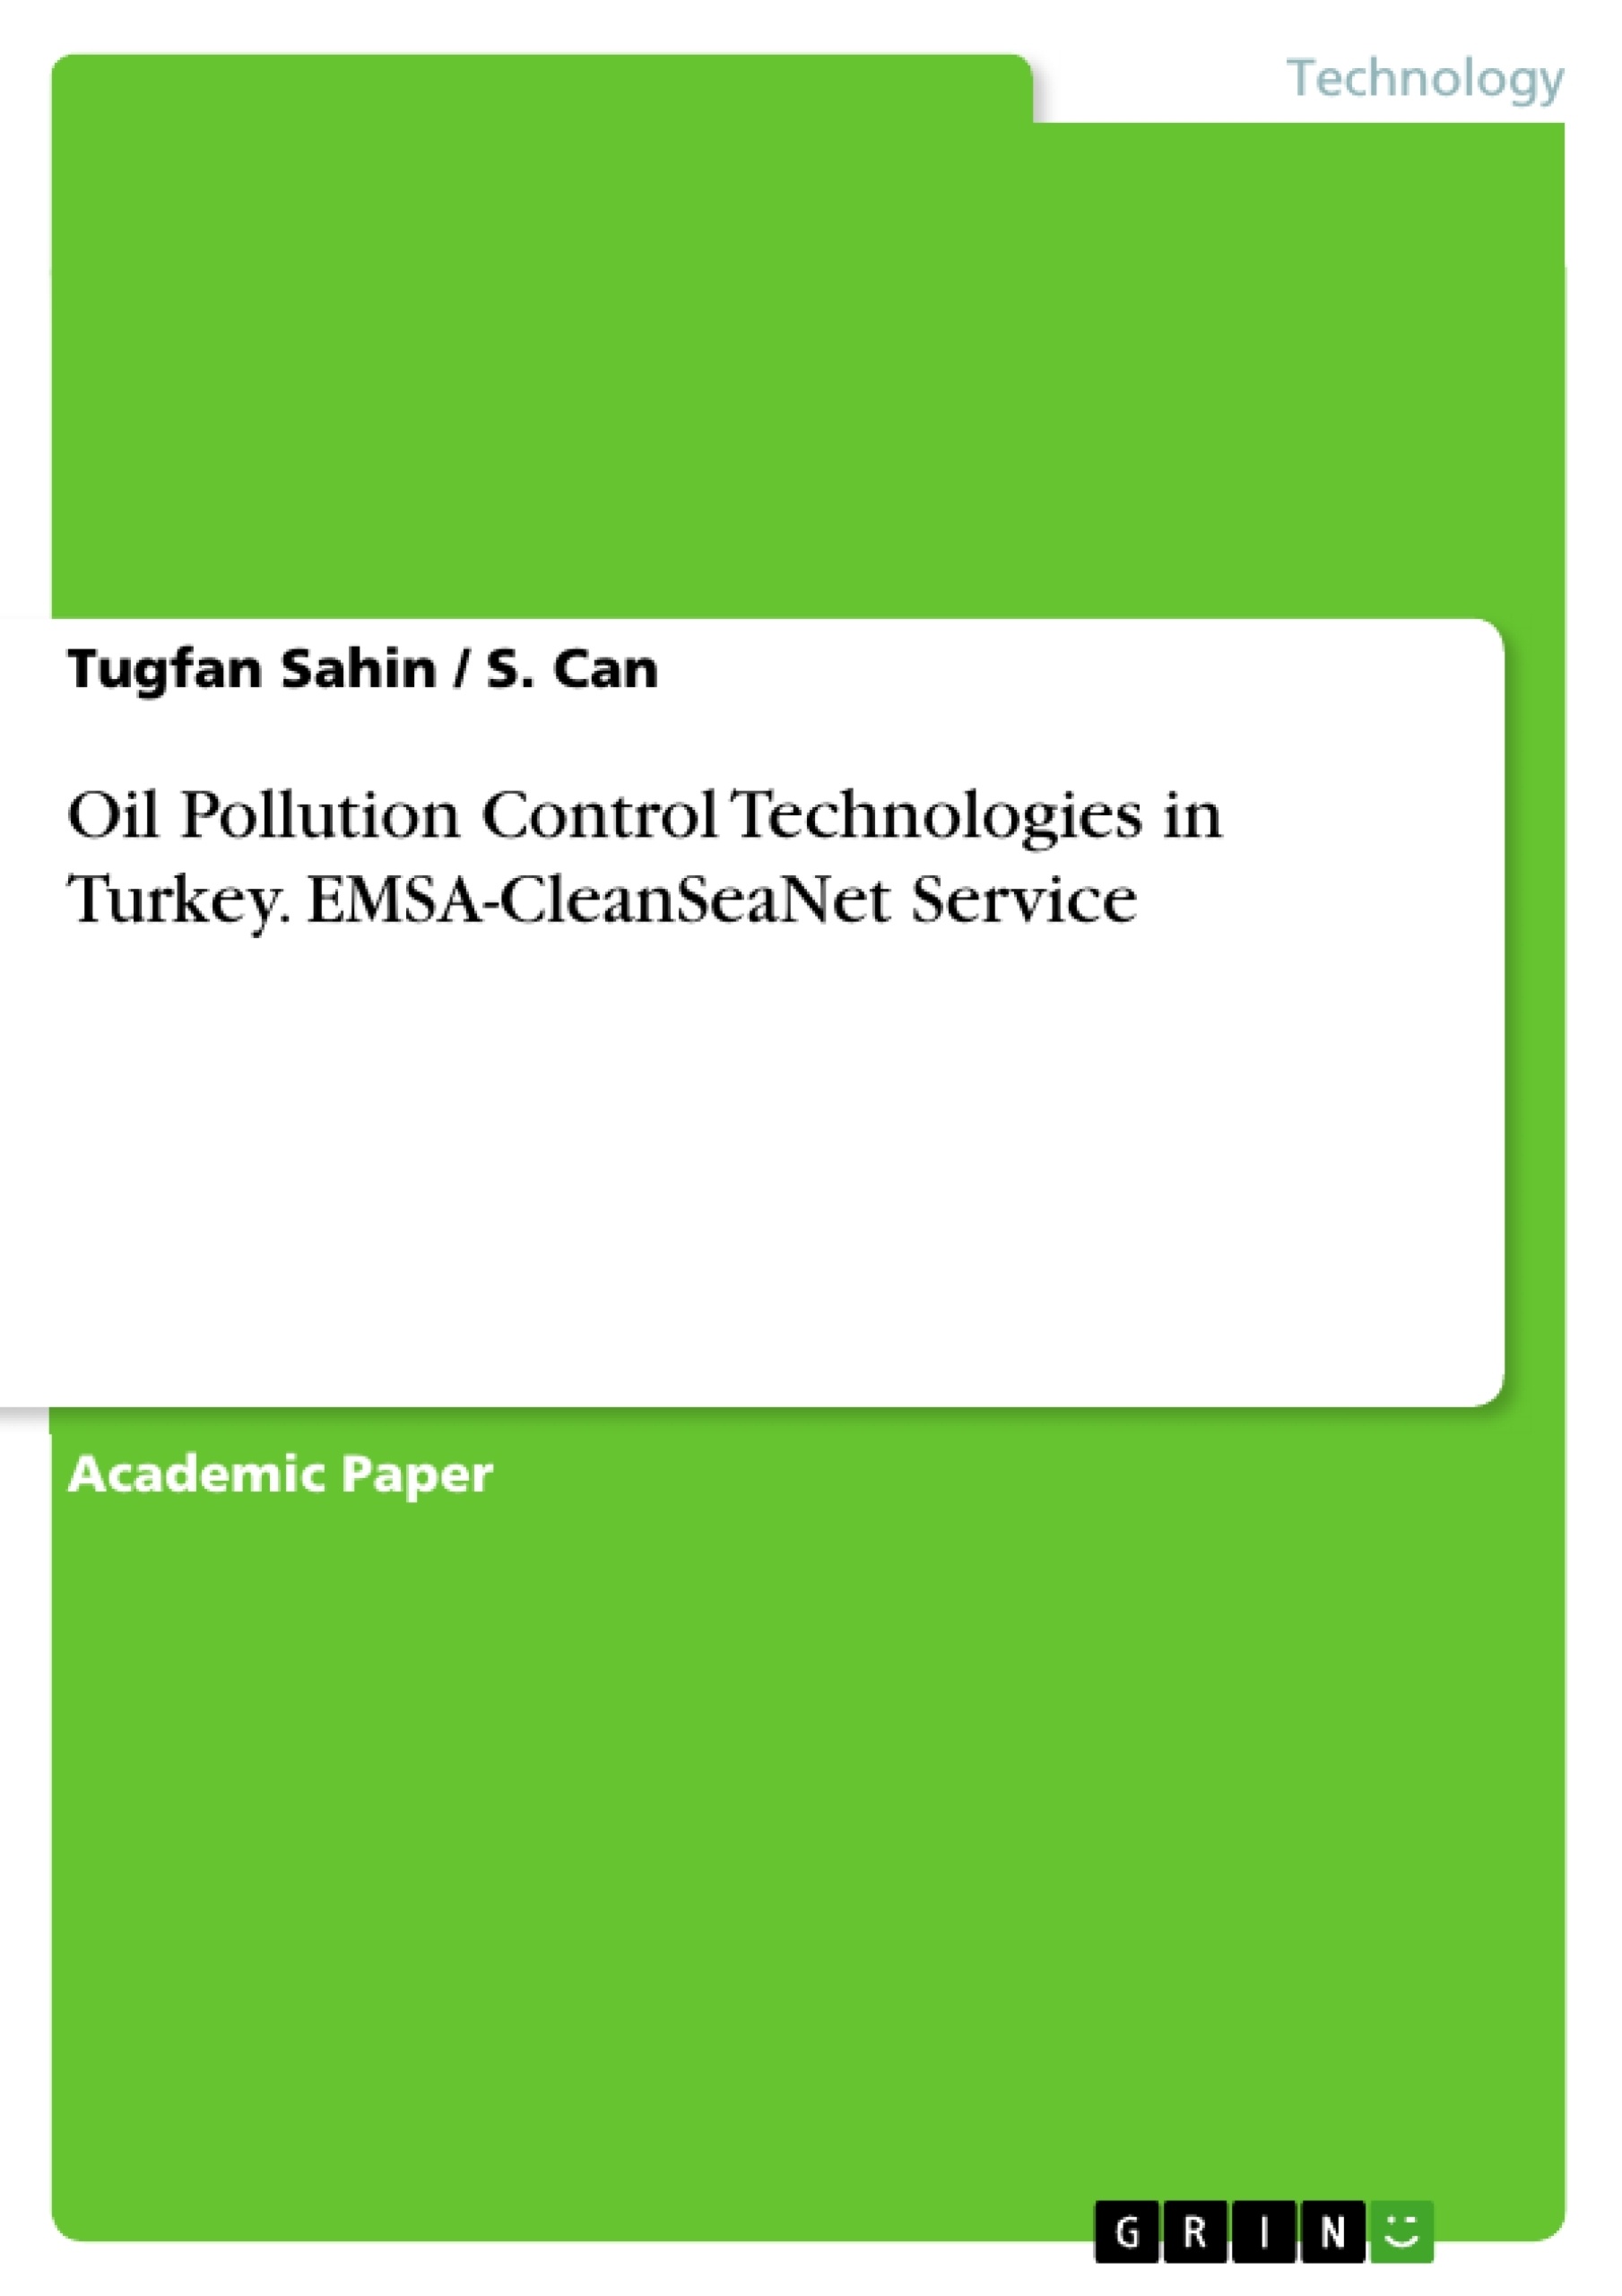 Titre: Oil Pollution Control Technologies in Turkey. EMSA-CleanSeaNet Service